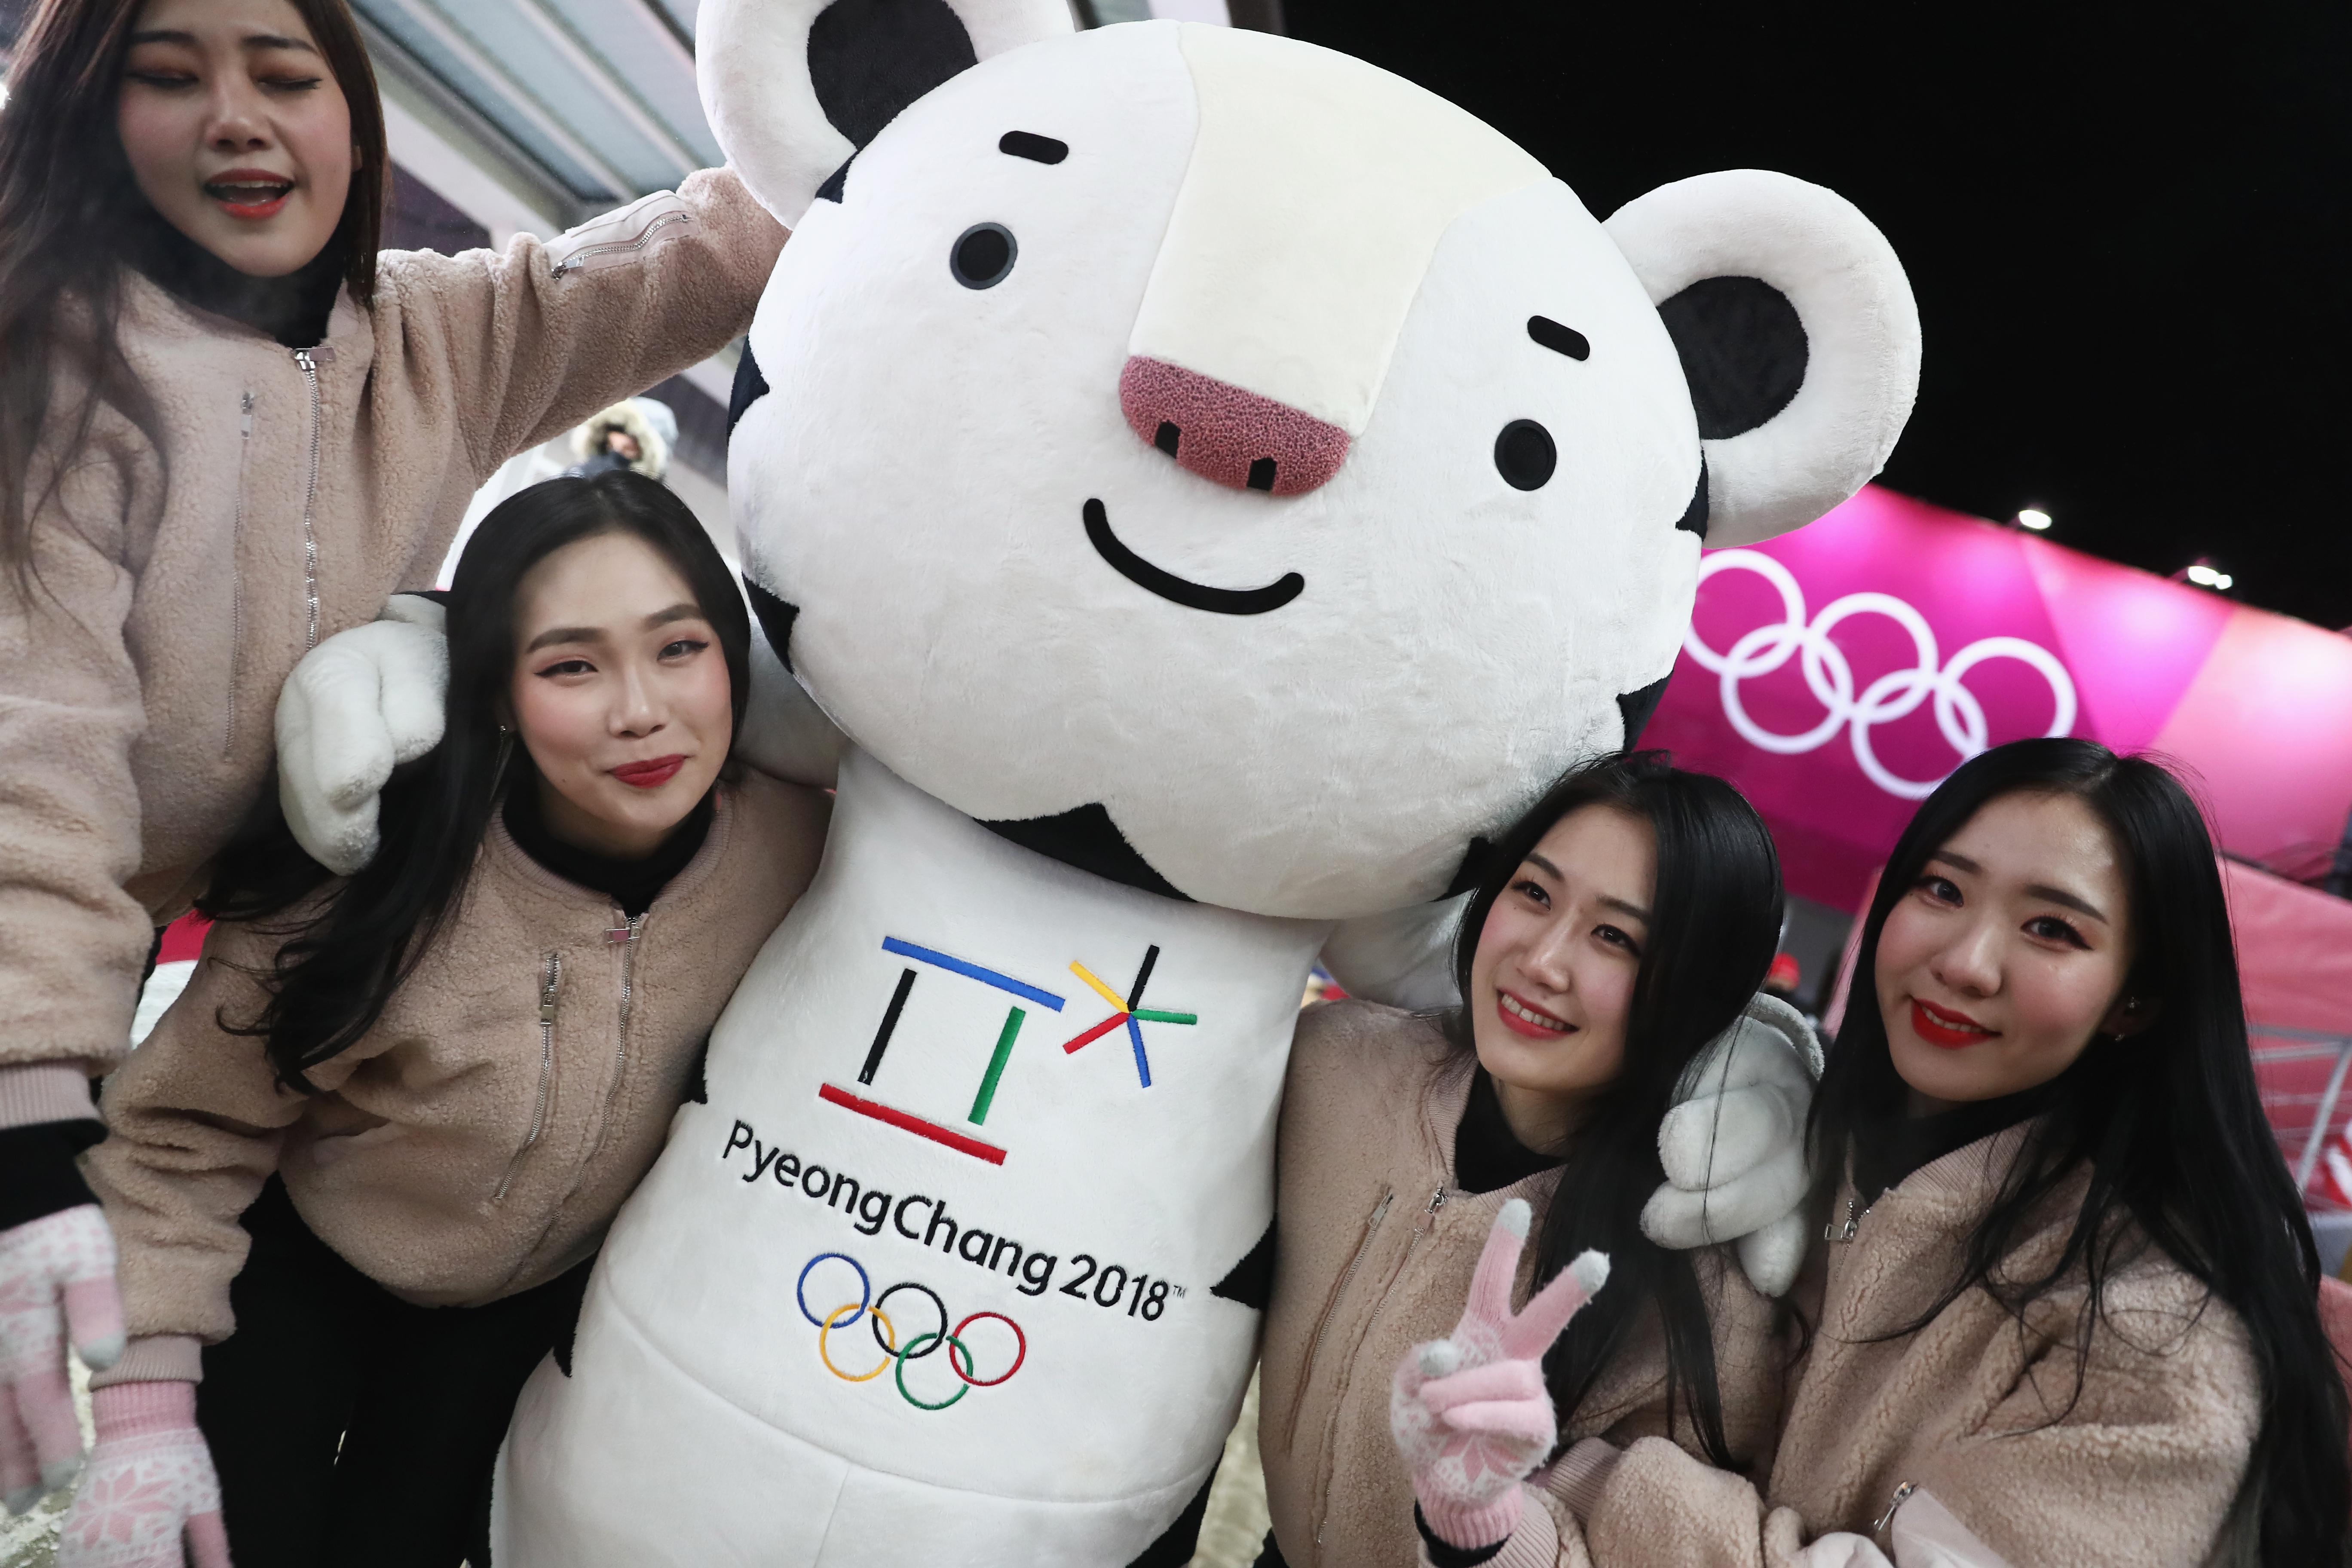 PYEONGCHANG-GUN, SOUTH KOREA - FEBRUARY 11:  Fans meet Soohorang the mascot during the Luge Men's Singles on day two of the PyeongChang 2018 Winter Olympic Games at Olympic Sliding Centre on February 11, 2018 in Pyeongchang-gun, South Korea.  (Photo by Alexander Hassenstein/Getty Images)